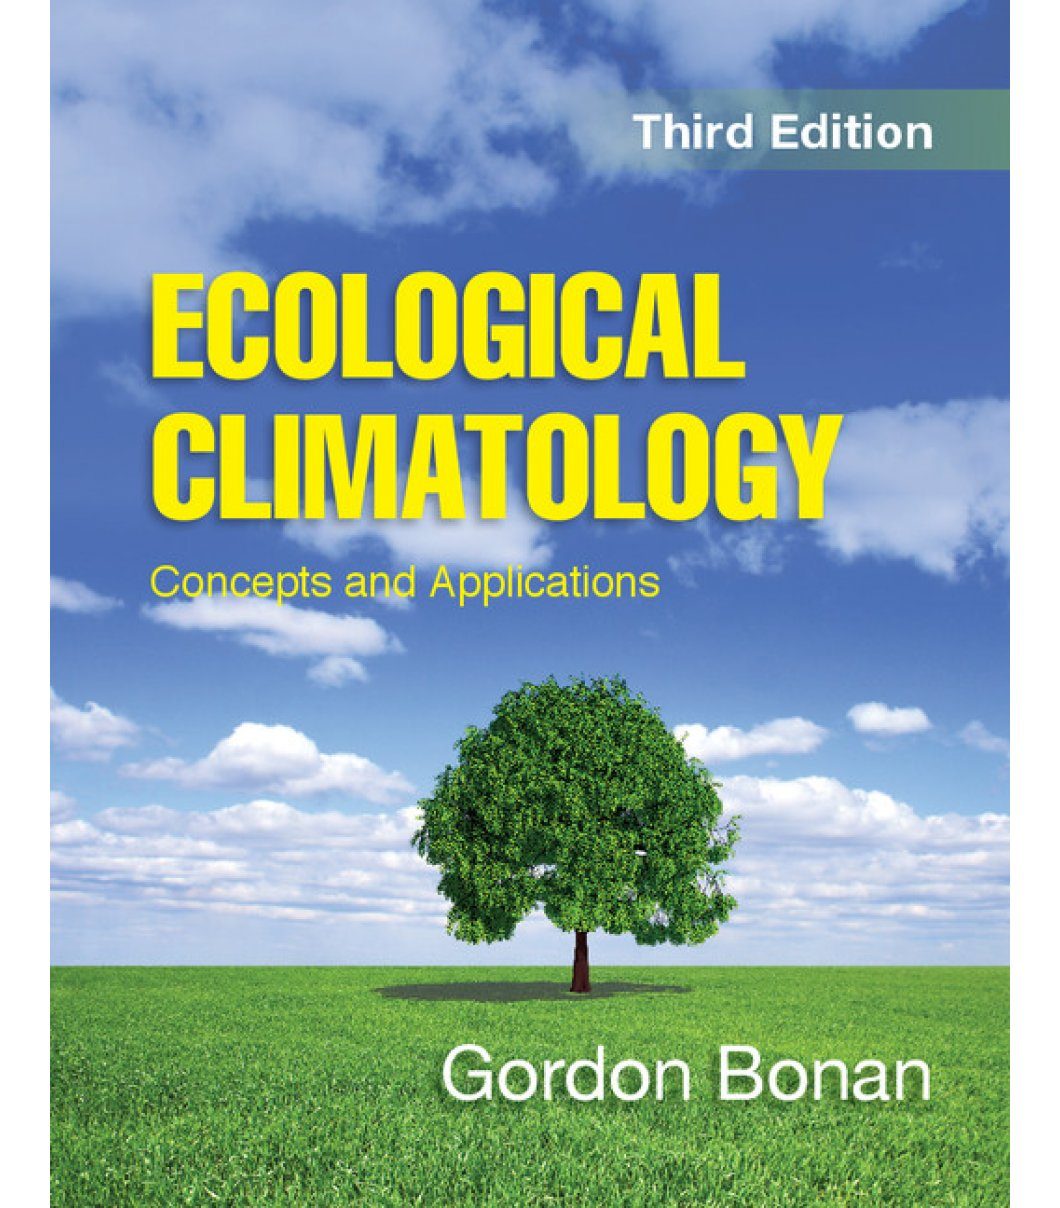 Ecology book. Ecological applications. The ecology book. Read a book about ecology. Booklet ecology.